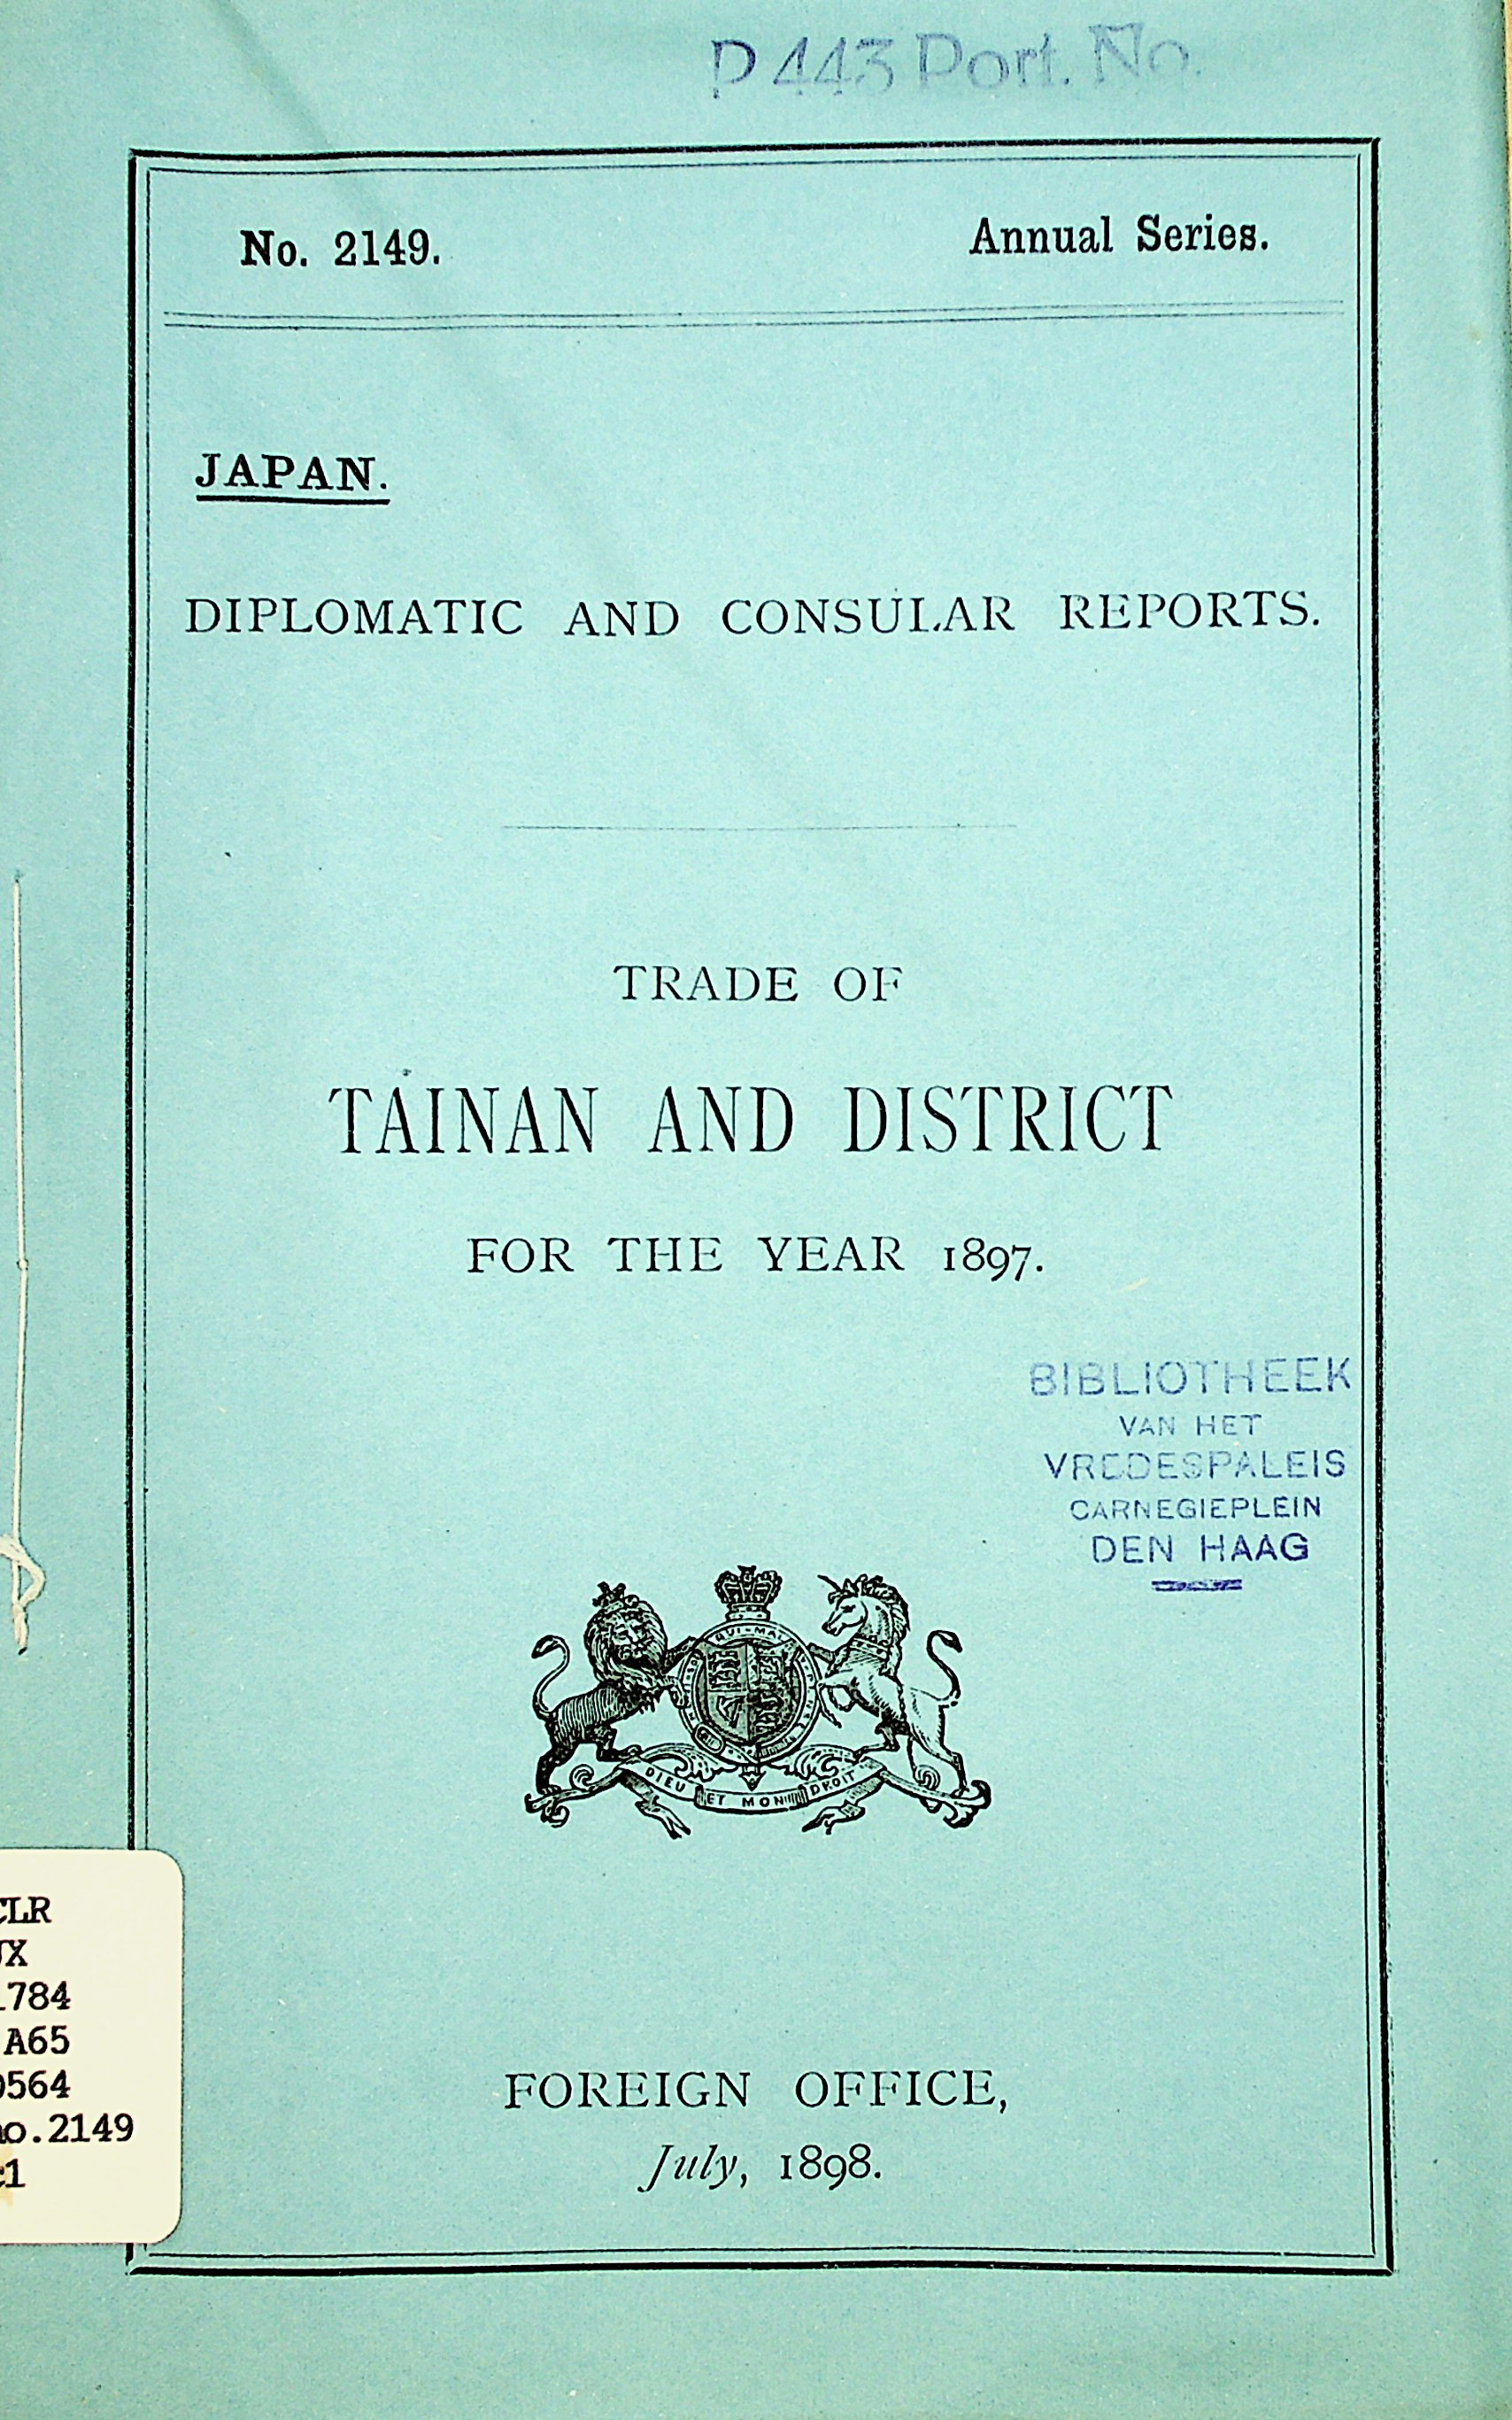 Japan : report for the year 1897 on the trade of Tainan and district